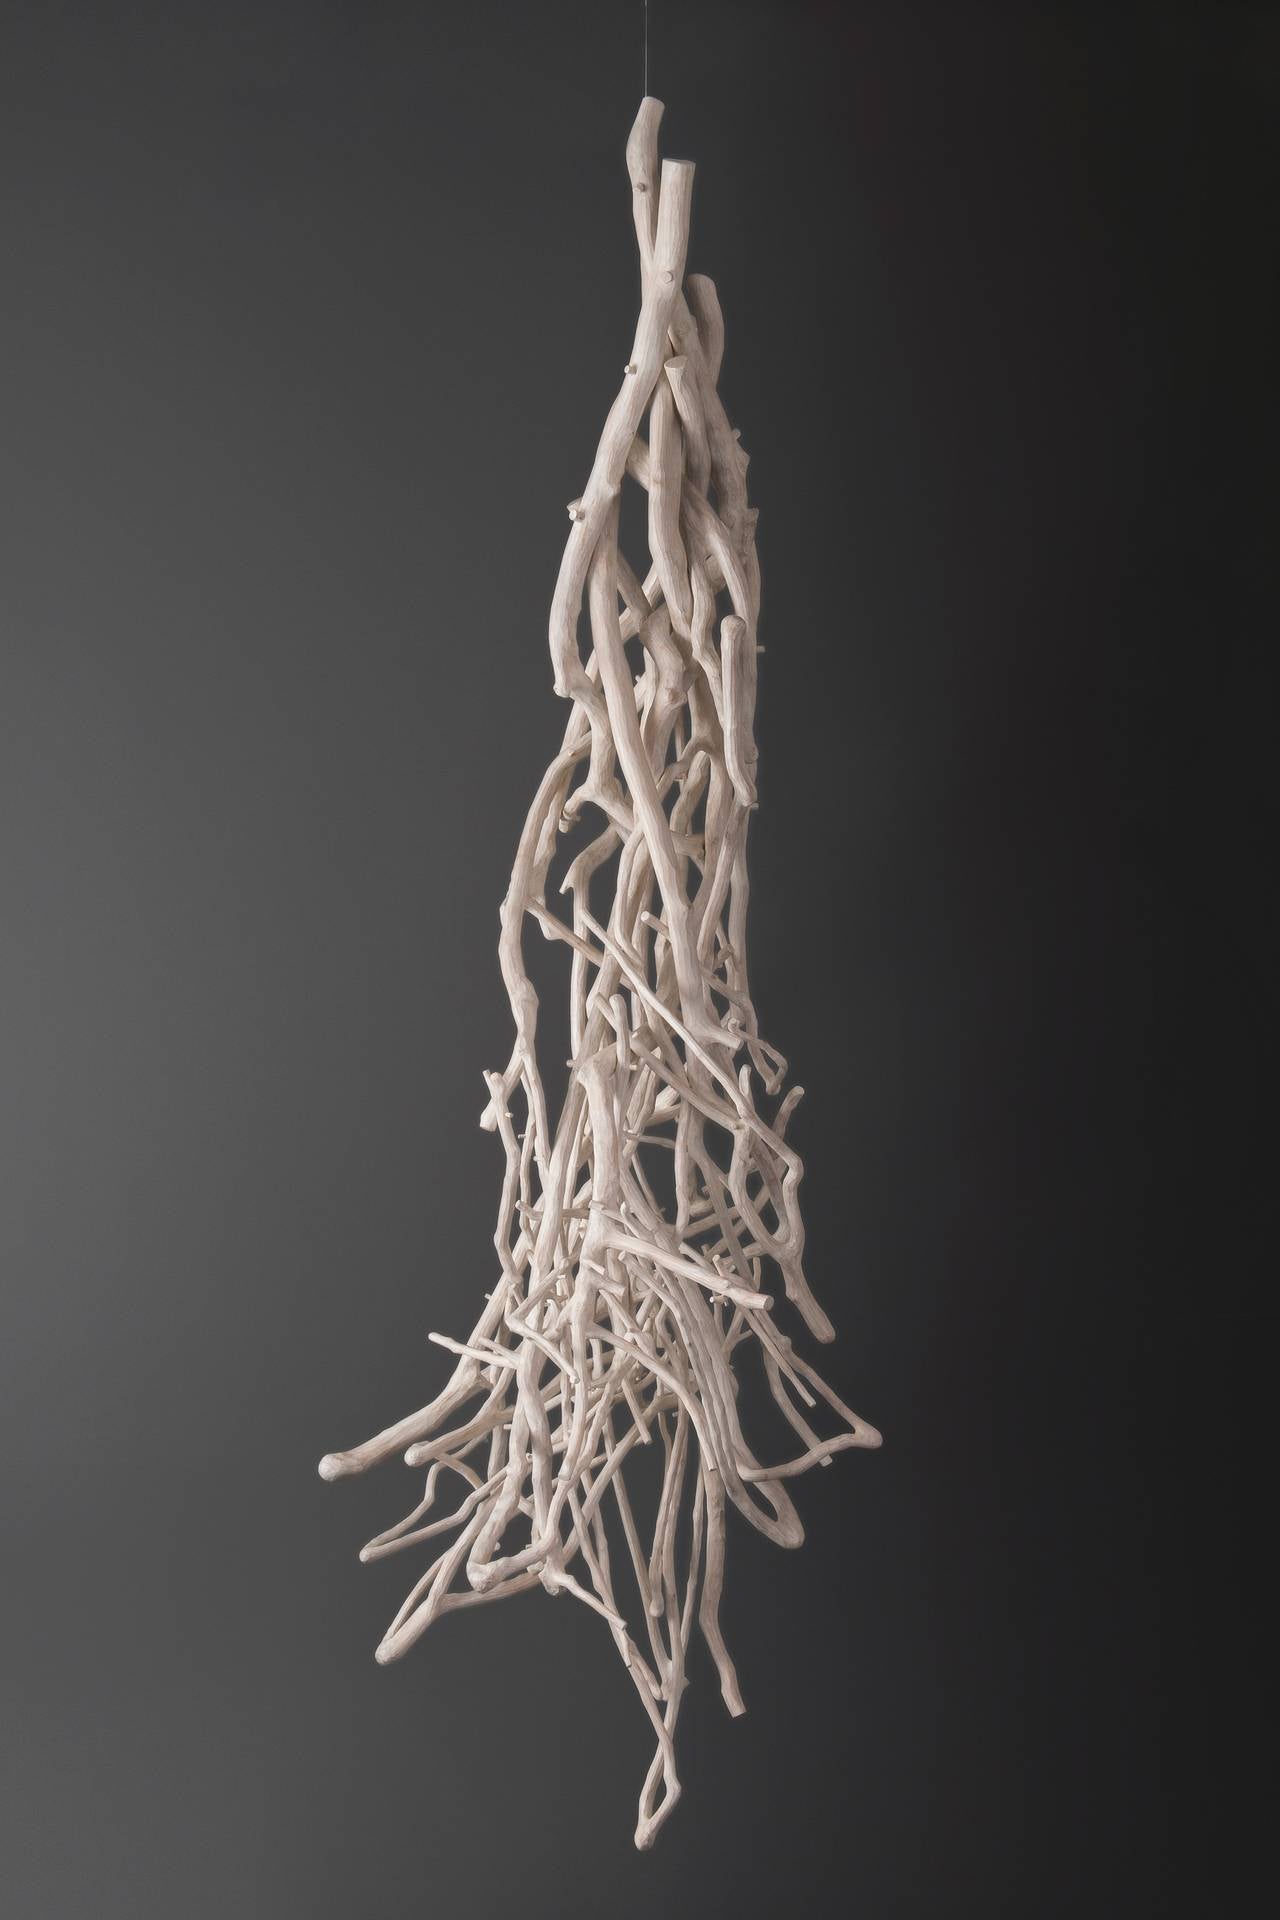 Sherry Owens Abstract Sculpture - Poised Between Death and Renewal